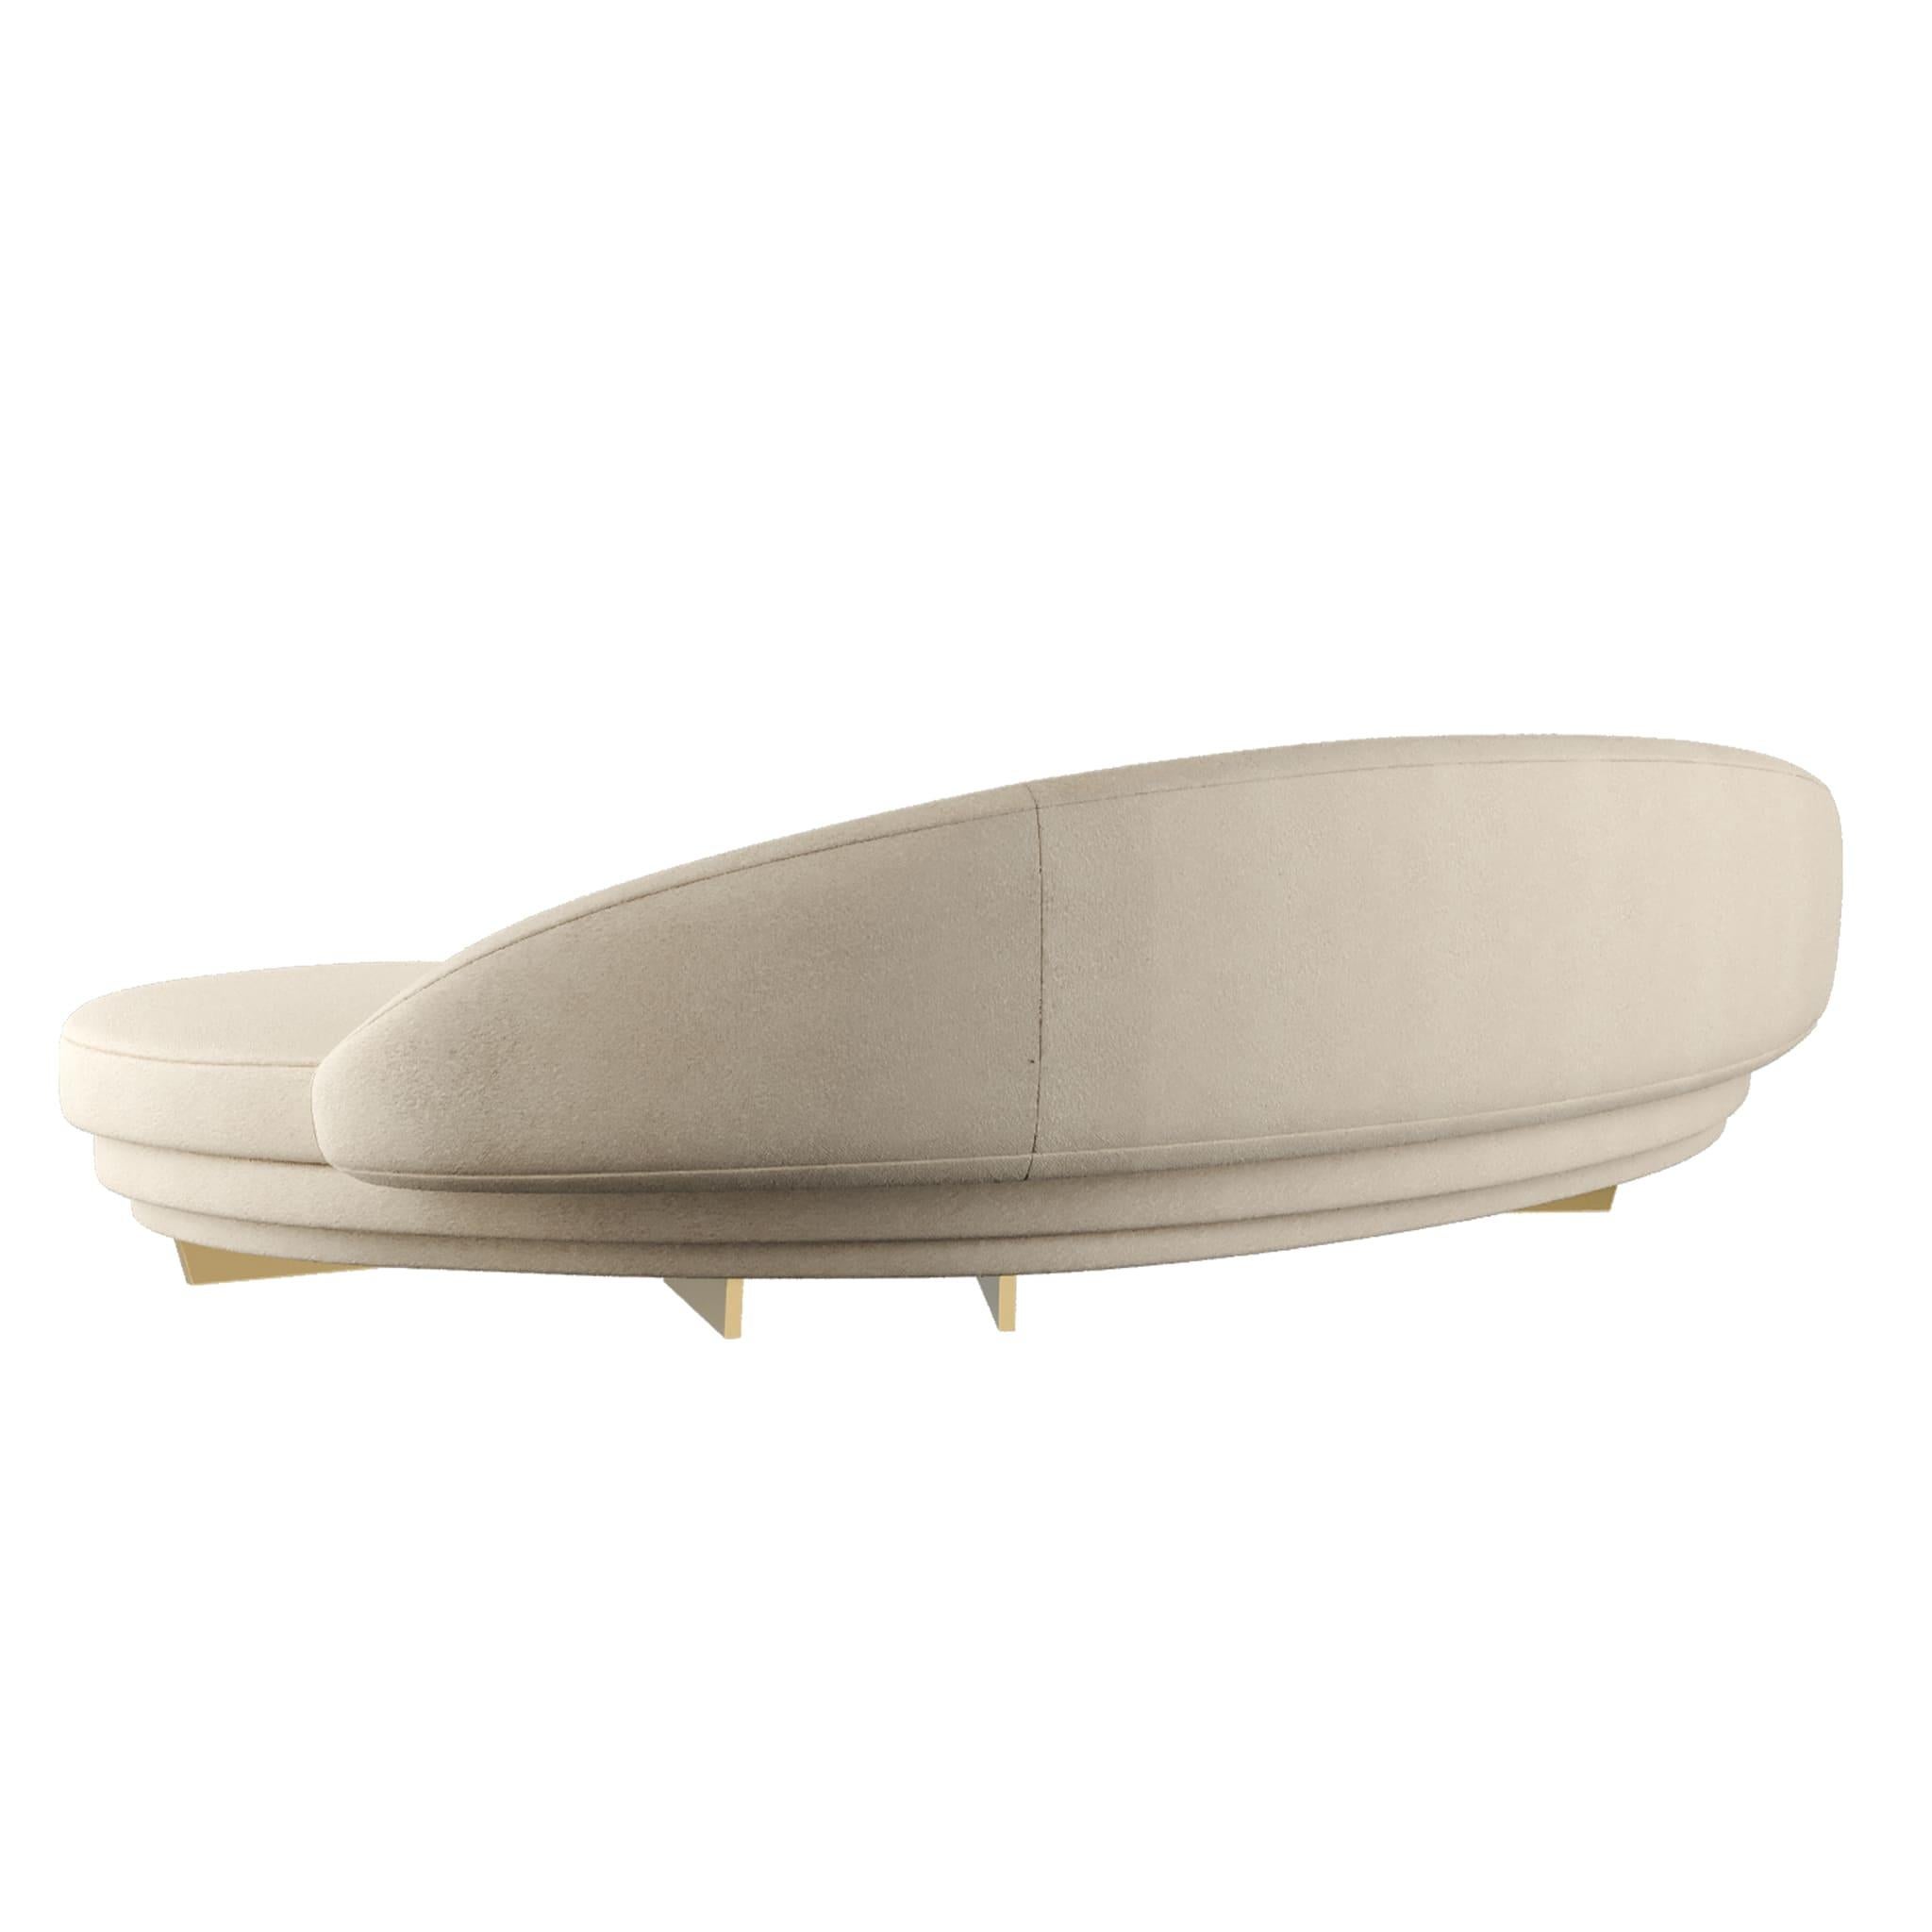 Contemporary Modern Curved Serpentine Sofa in Beige Velvet W Gold & Wood Details For Sale